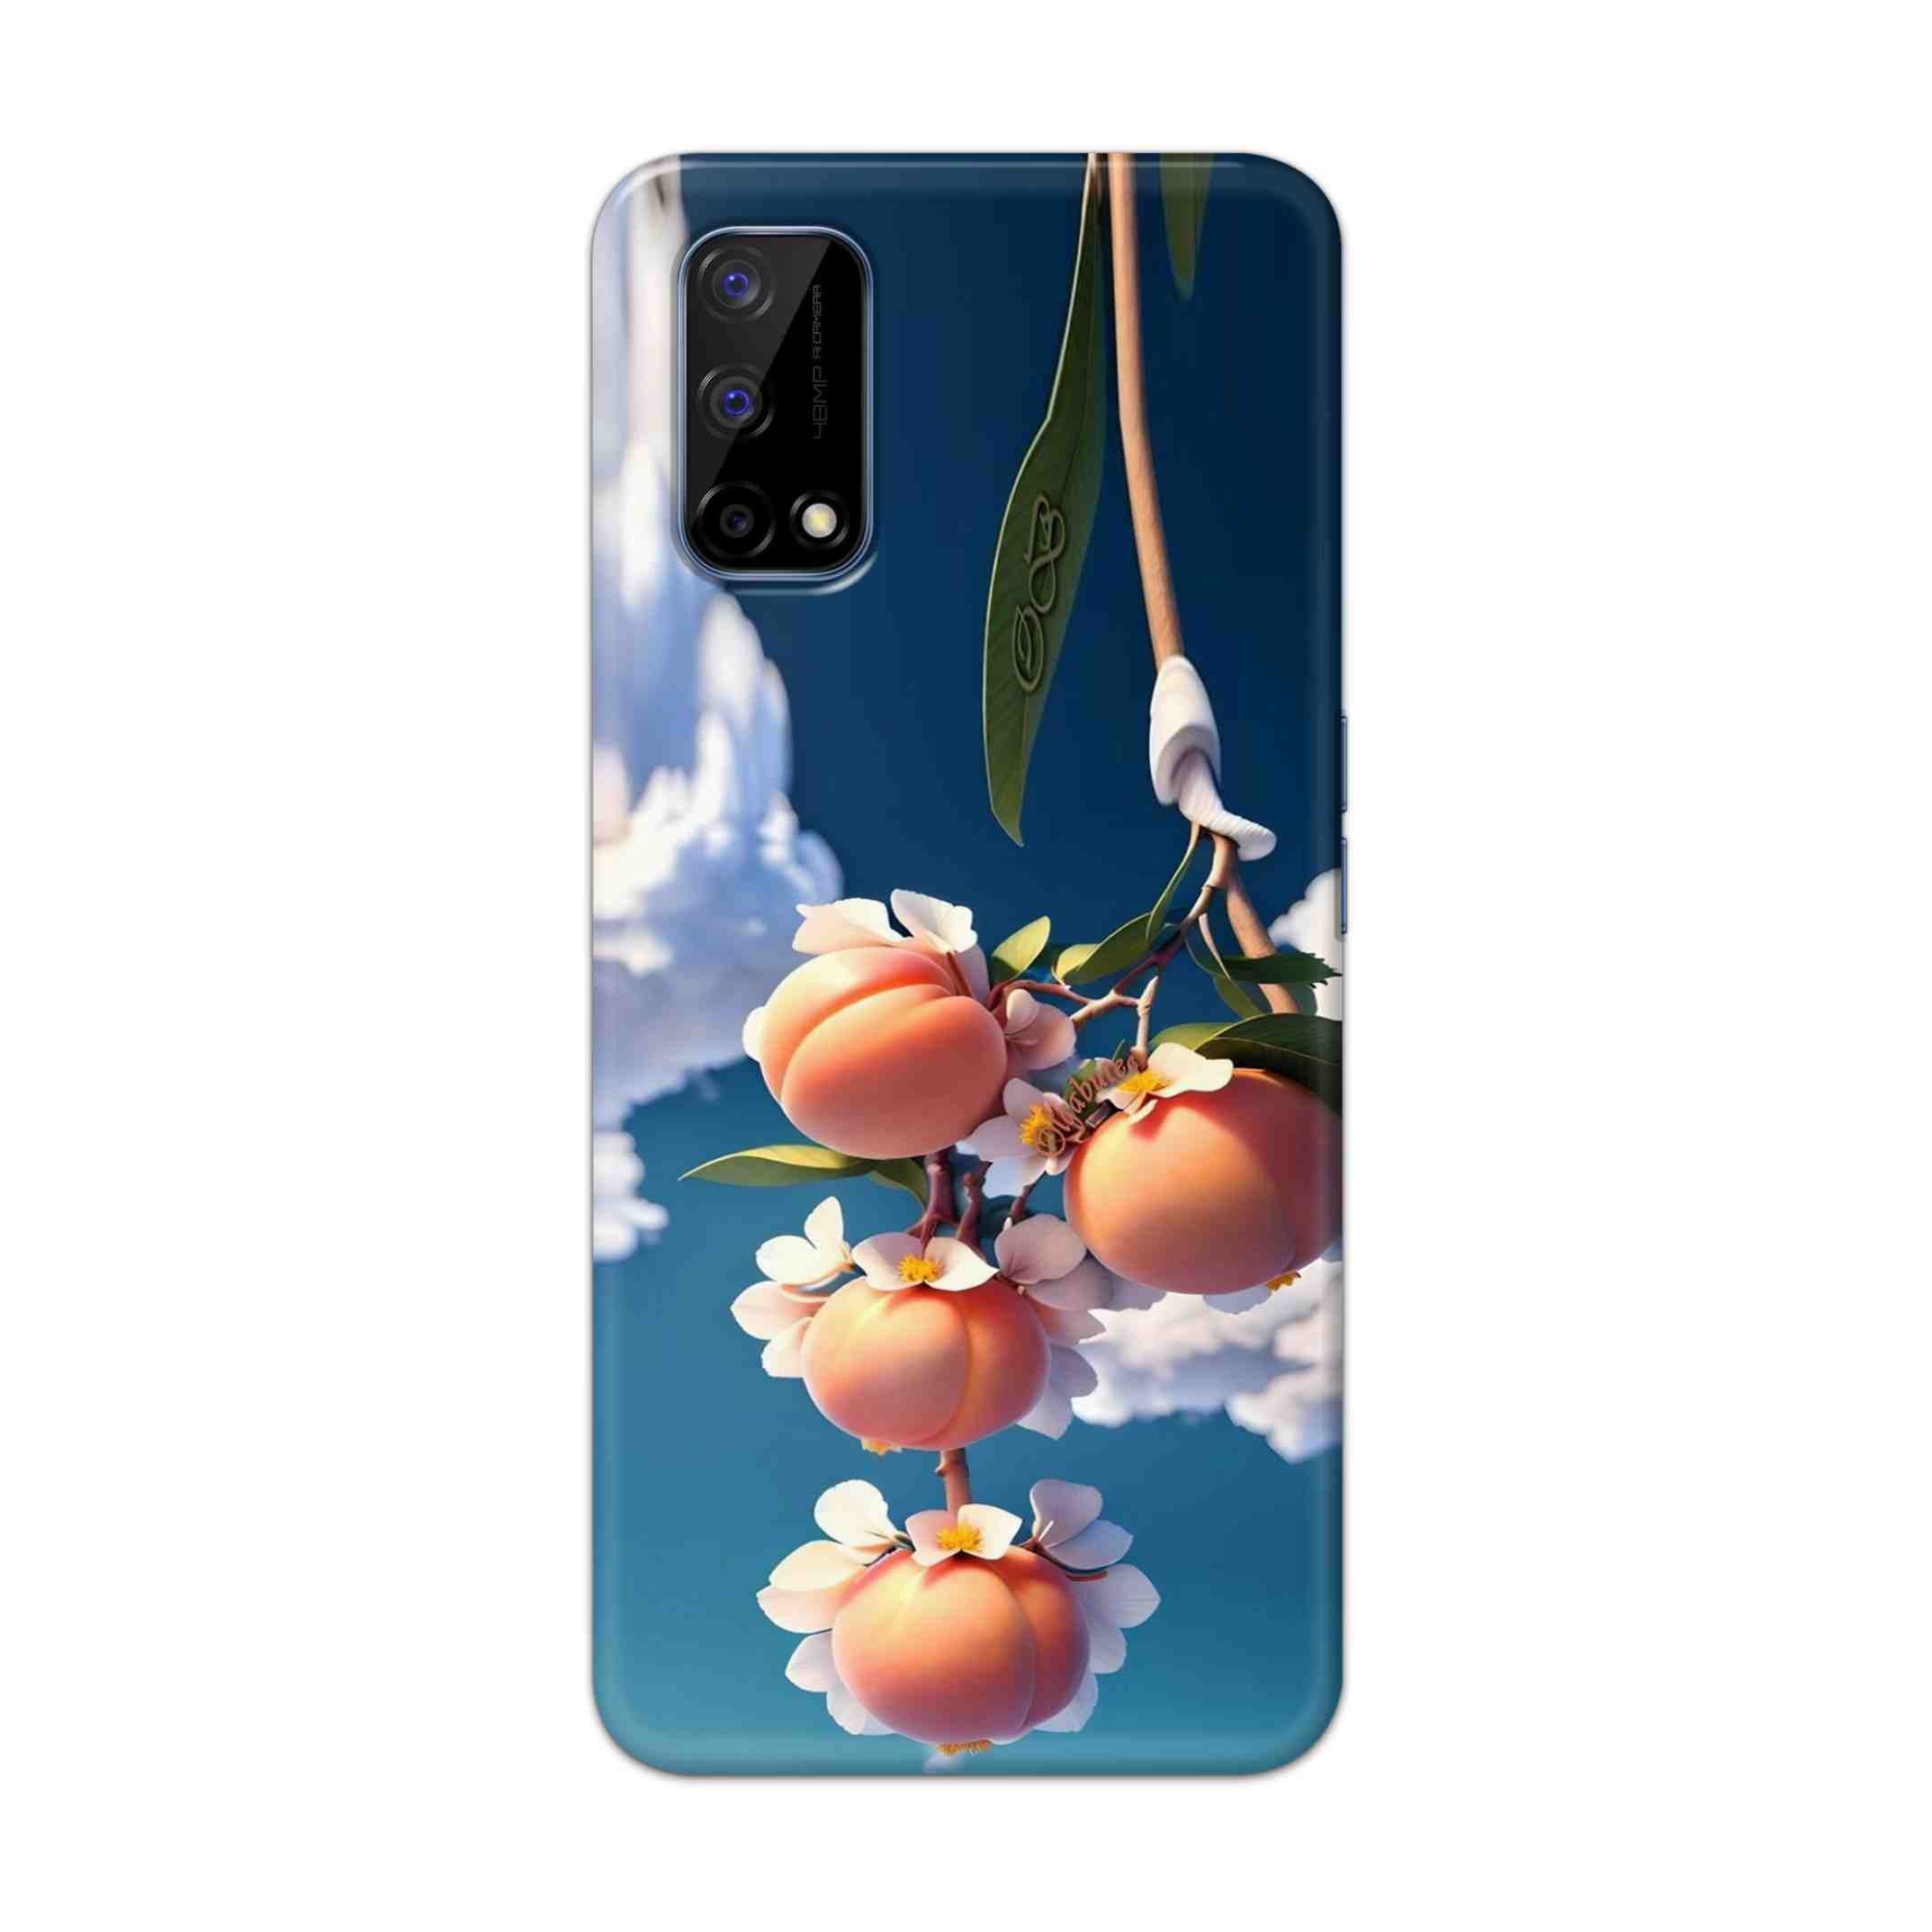 Buy Fruit Hard Back Mobile Phone Case Cover For Realme Narzo 30 Pro Online